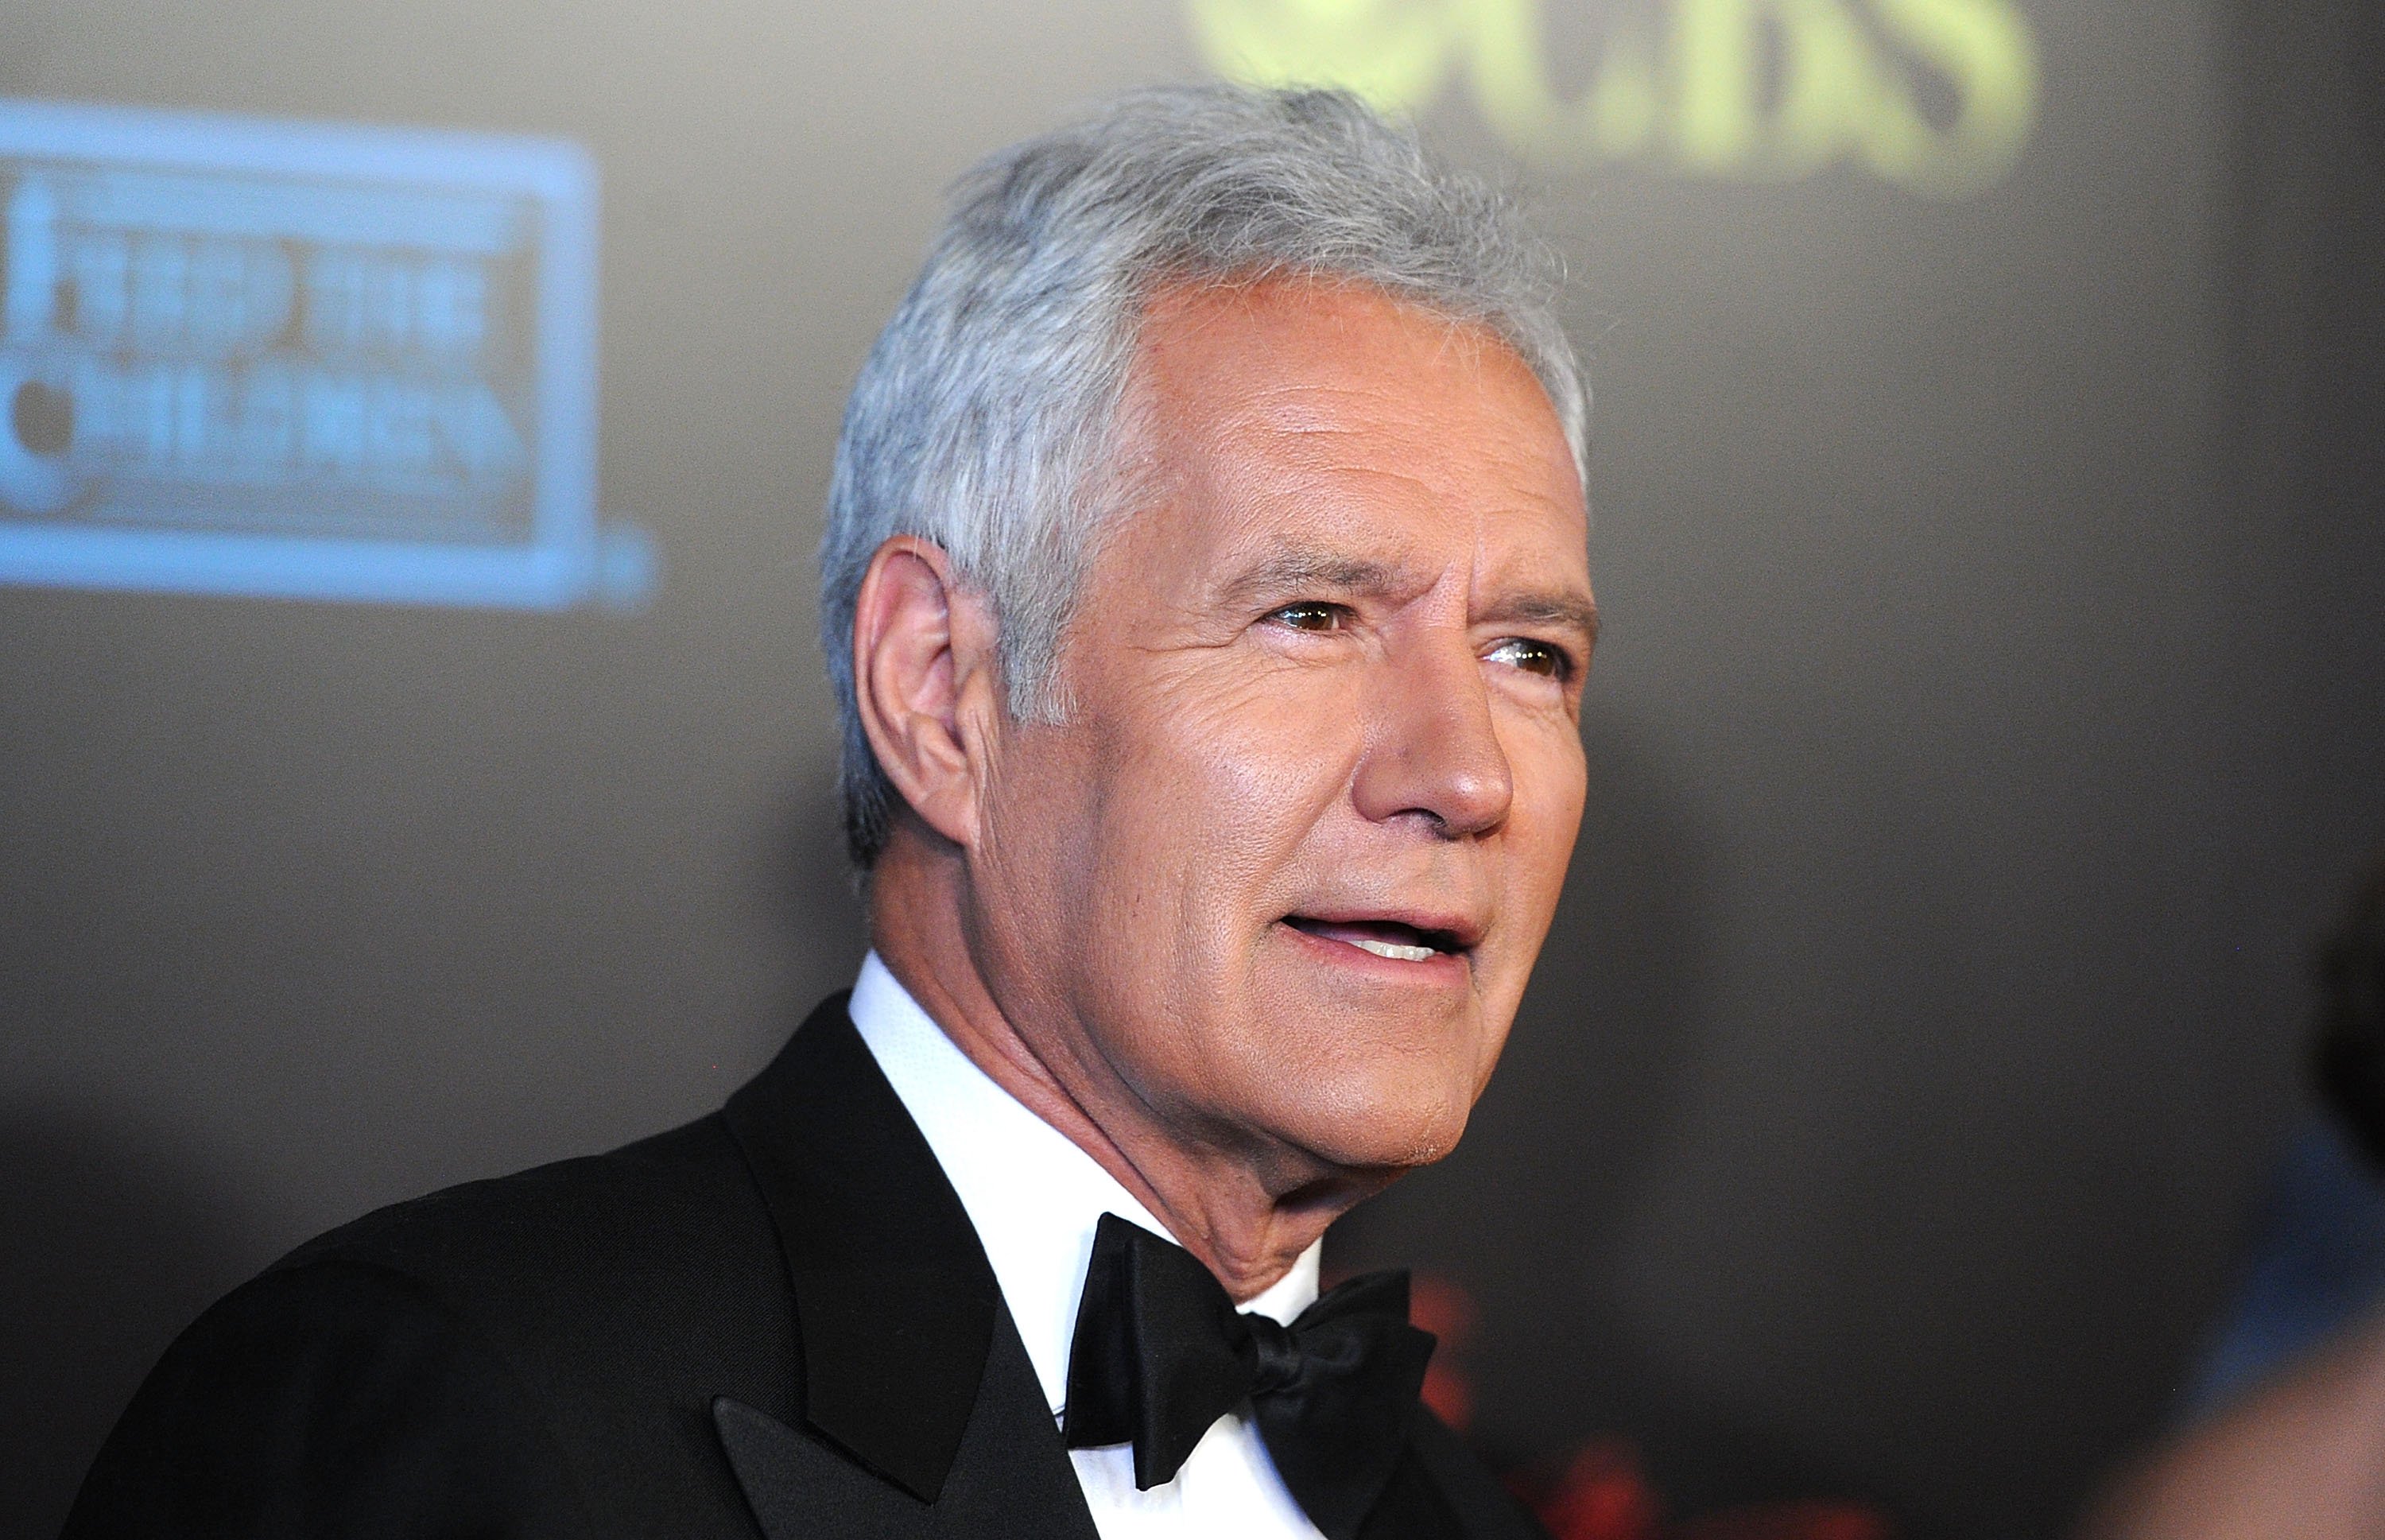 Alex Trebek arrives at the 37th Annual Daytime Entertainment Emmy Awards held at the Las Vegas Hilton on June 27, 2010 in Las Vegas, Nevada | Photo: Getty Images